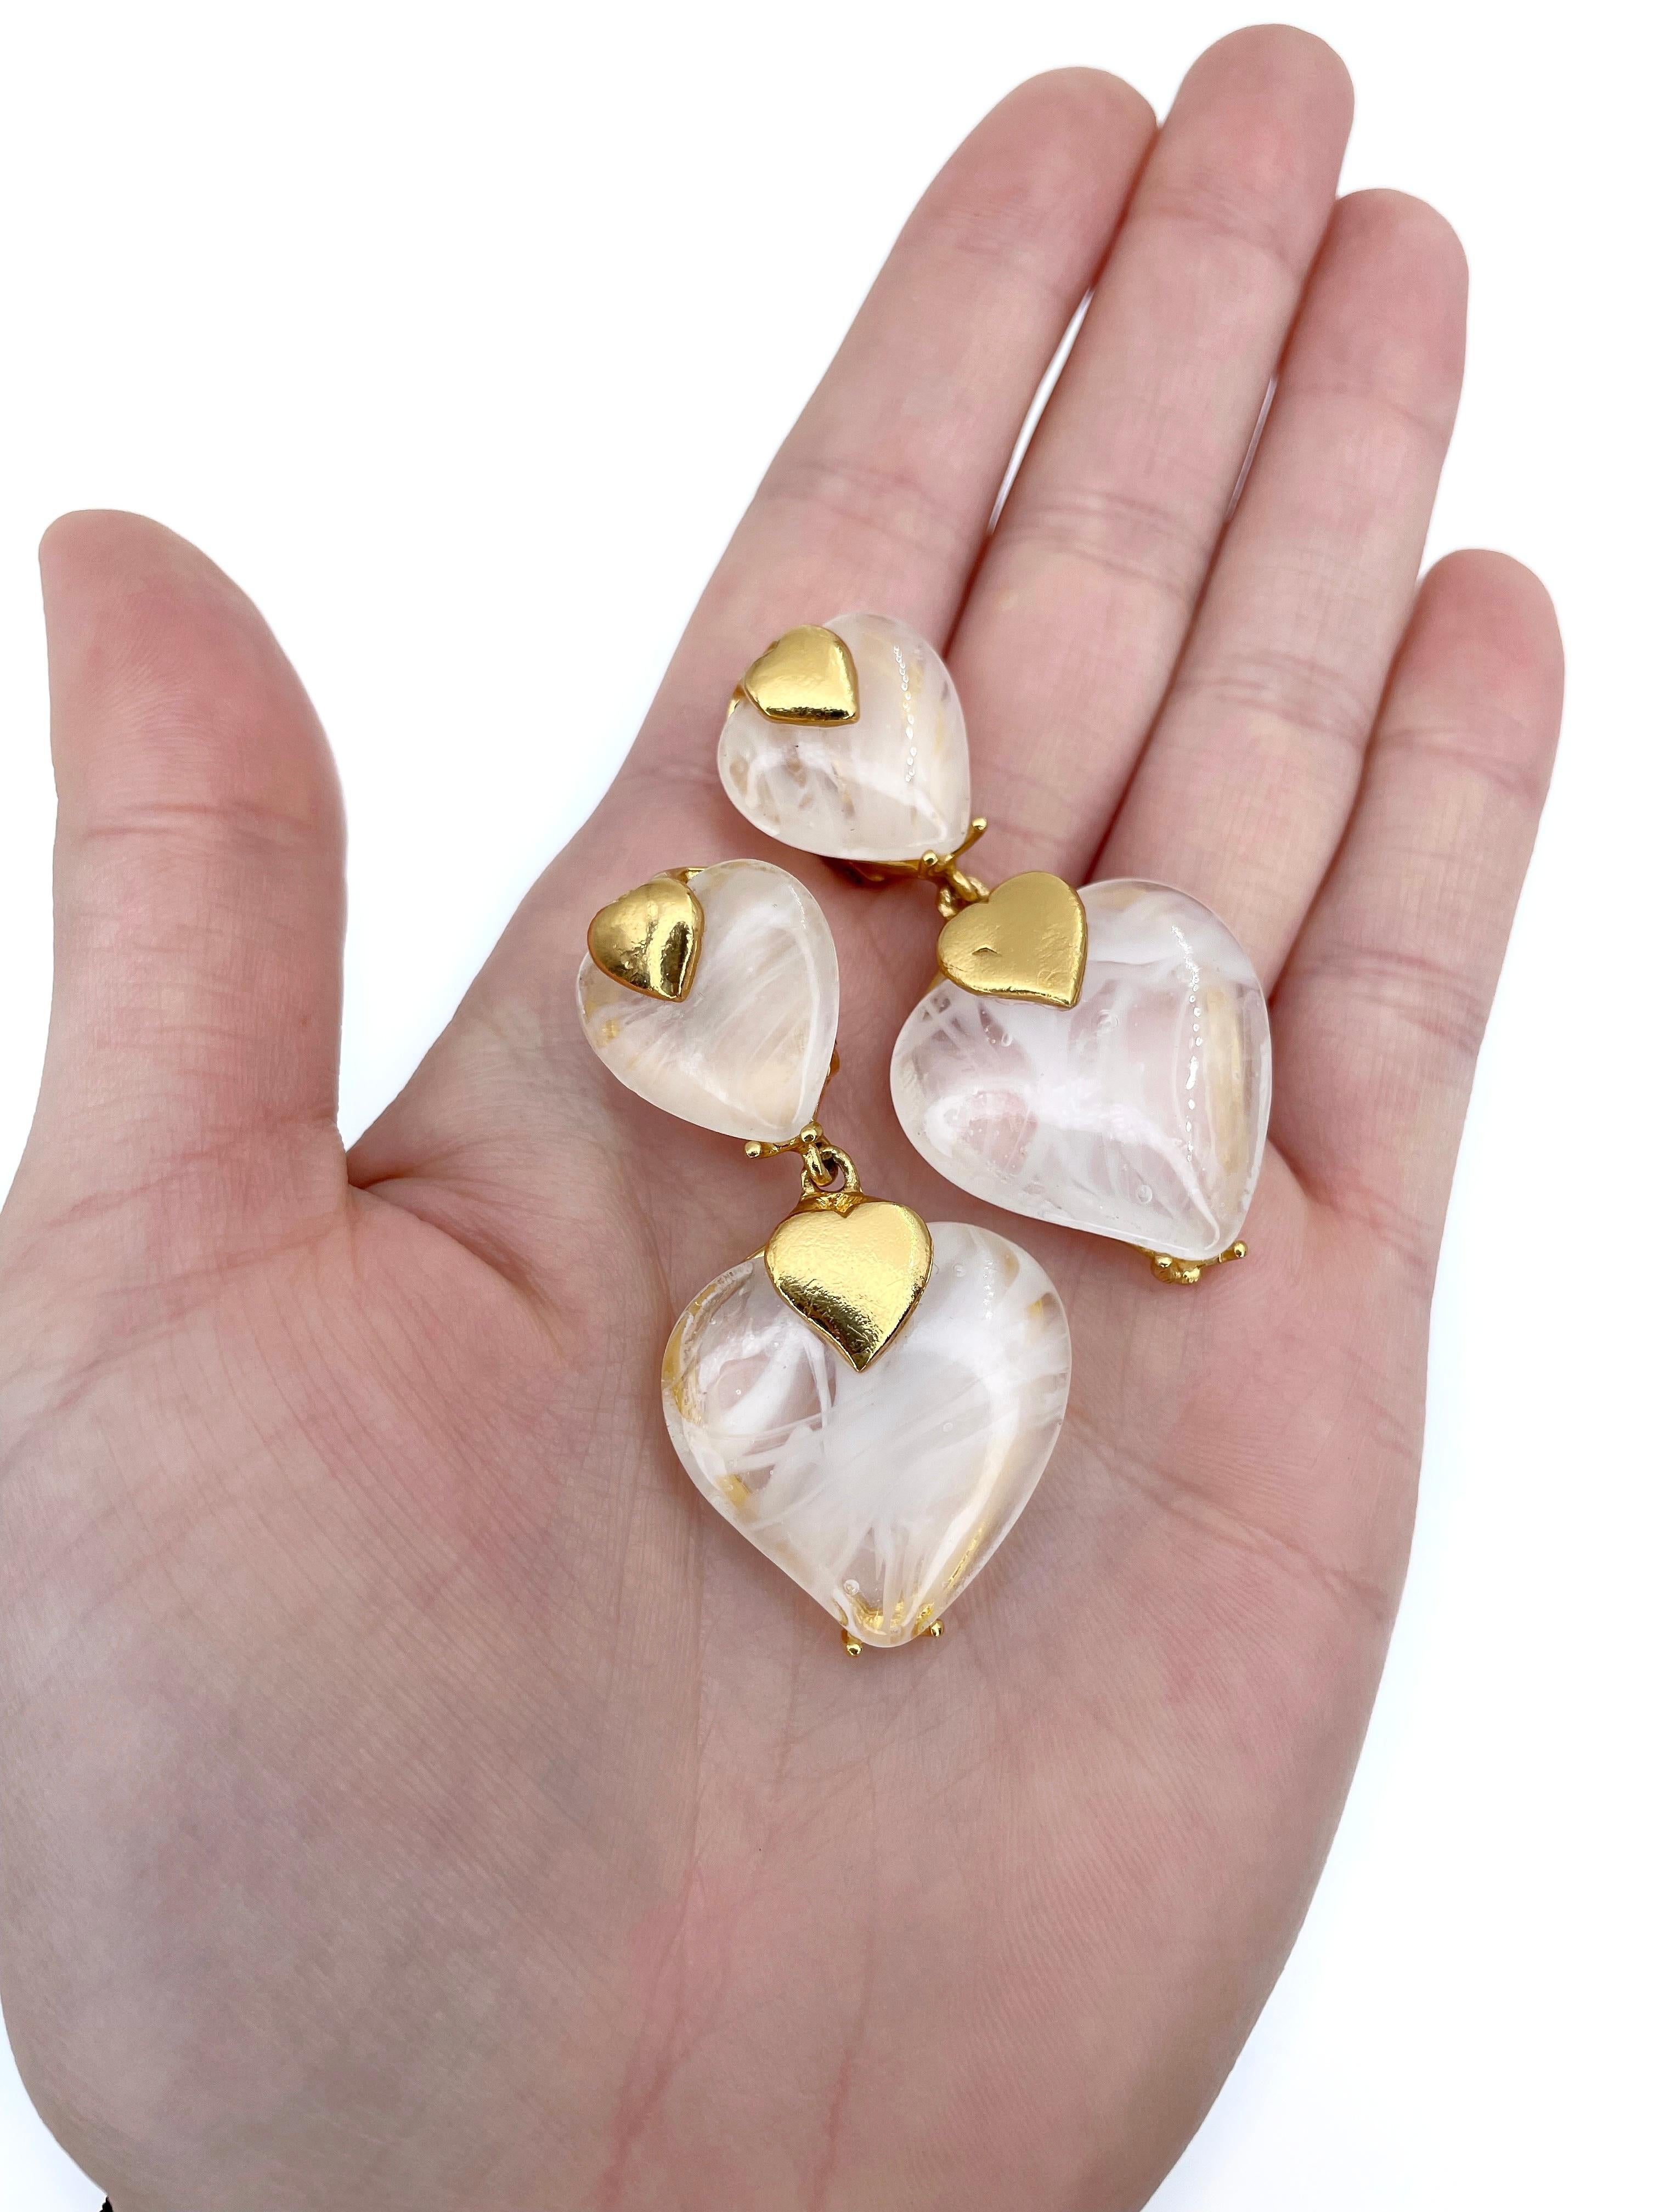 This is a gold tone vintage heart shape clip on earrings designed by YSL in 1970’s. This piece is gold plated. It features white transparent lucite.

Signed: 